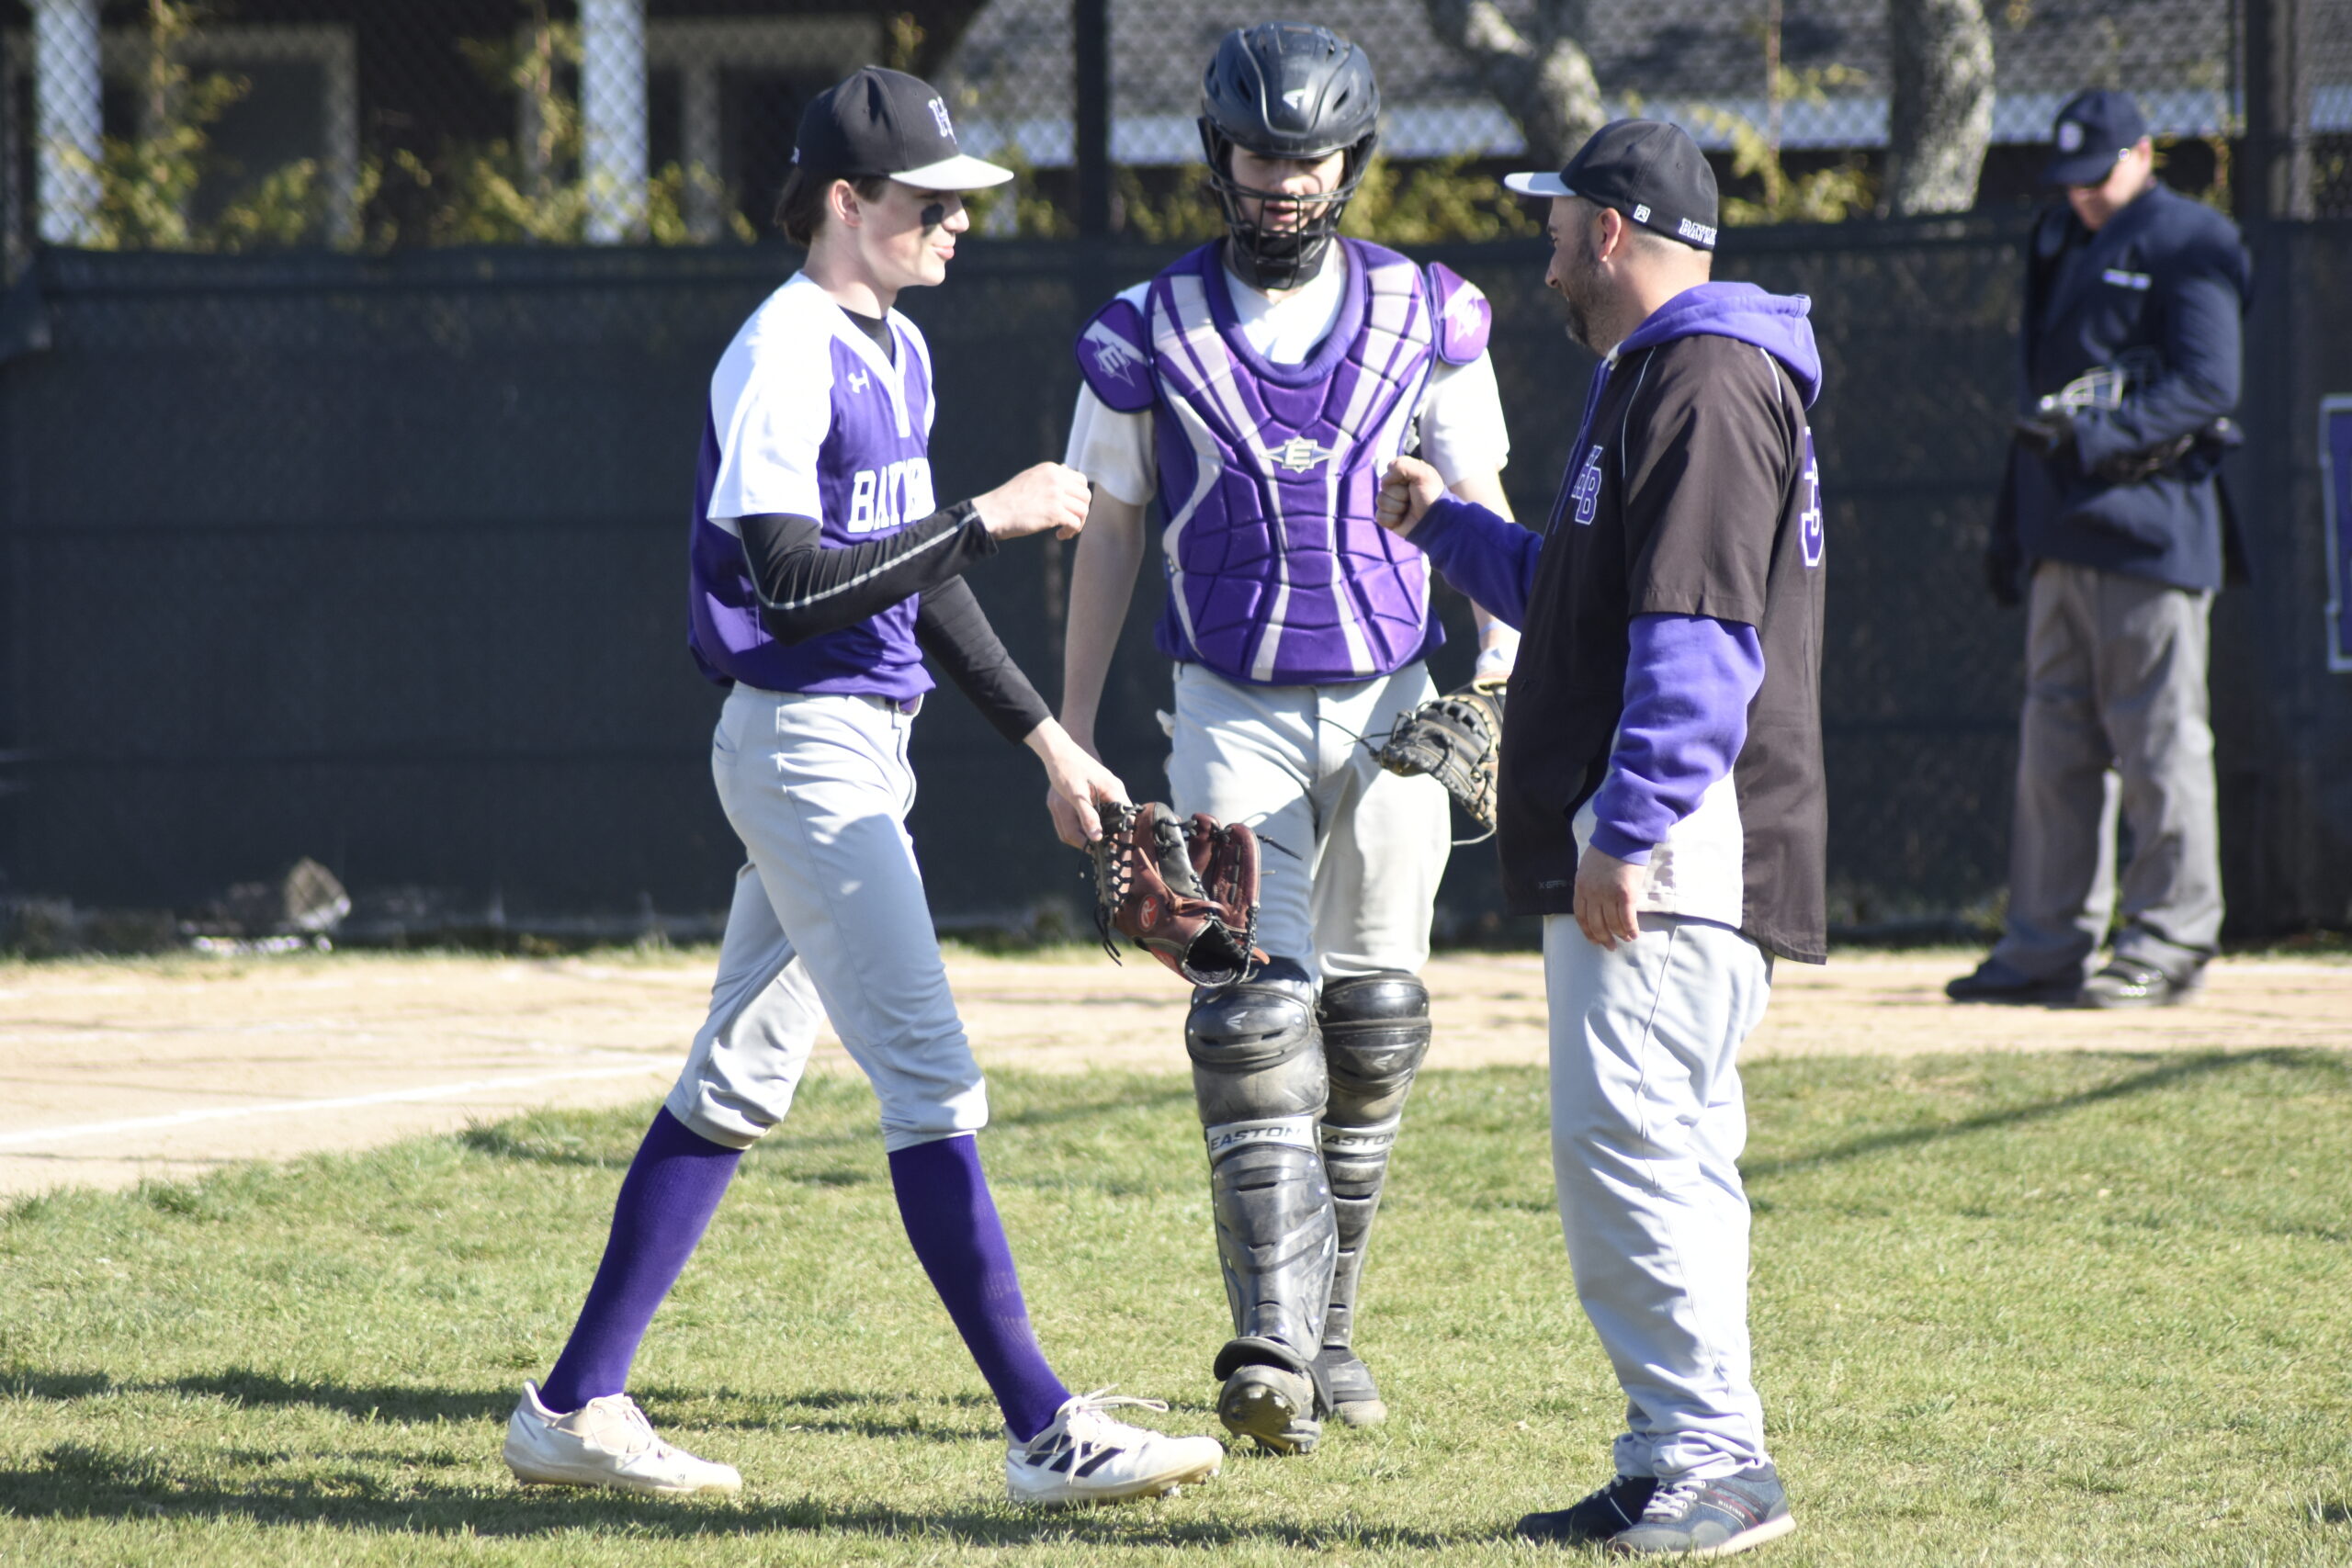 Hampton Bays starting pitcher Patrick Donahue gets congratulated by head coach Rob Pinney and catcher Aidan Kamp after recording a strikeout to get out of an inning.   DREW BUDD